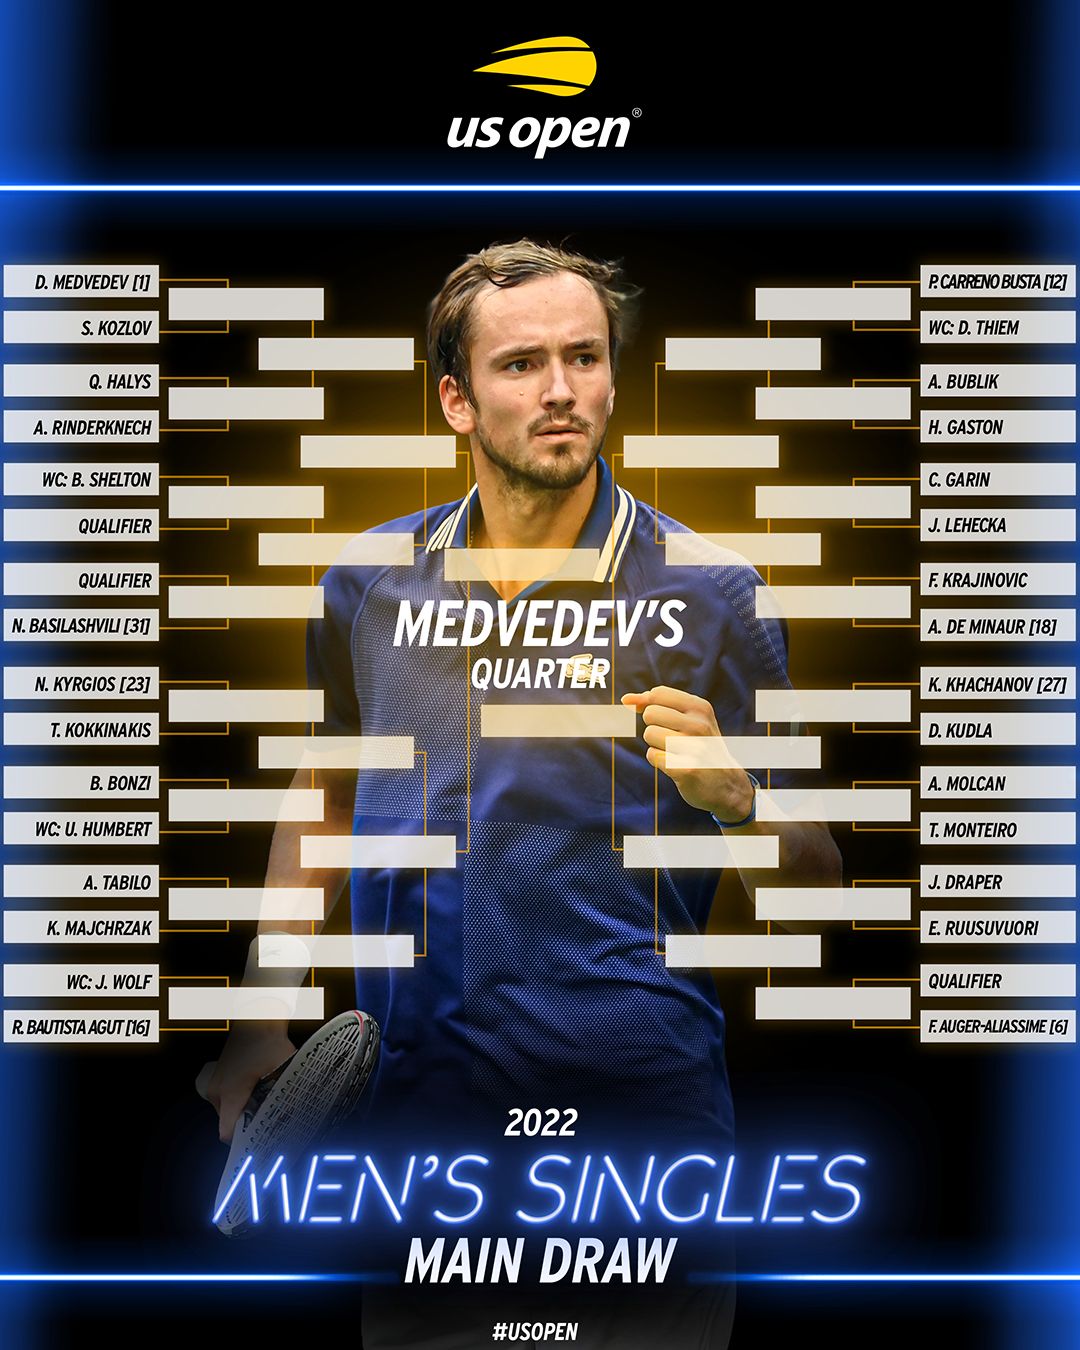 ATP Draw confirmed for 2022 US Open Defending champion Medvedev to